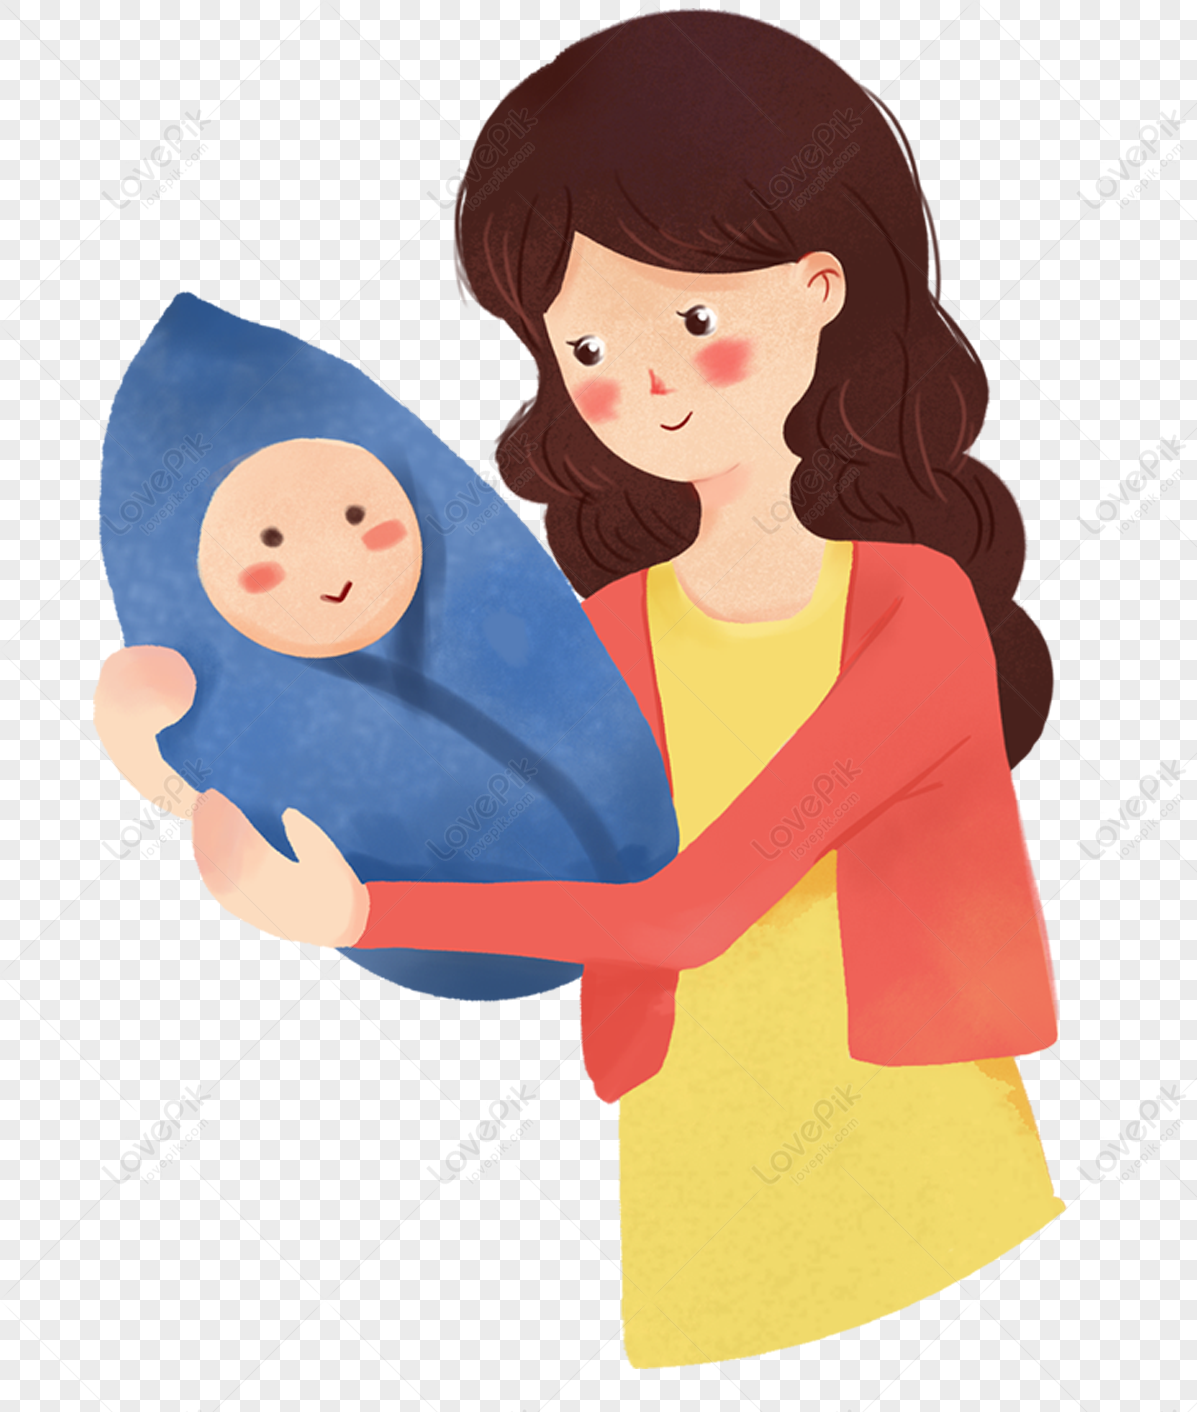 A mother with a baby, material, mother, baby png image